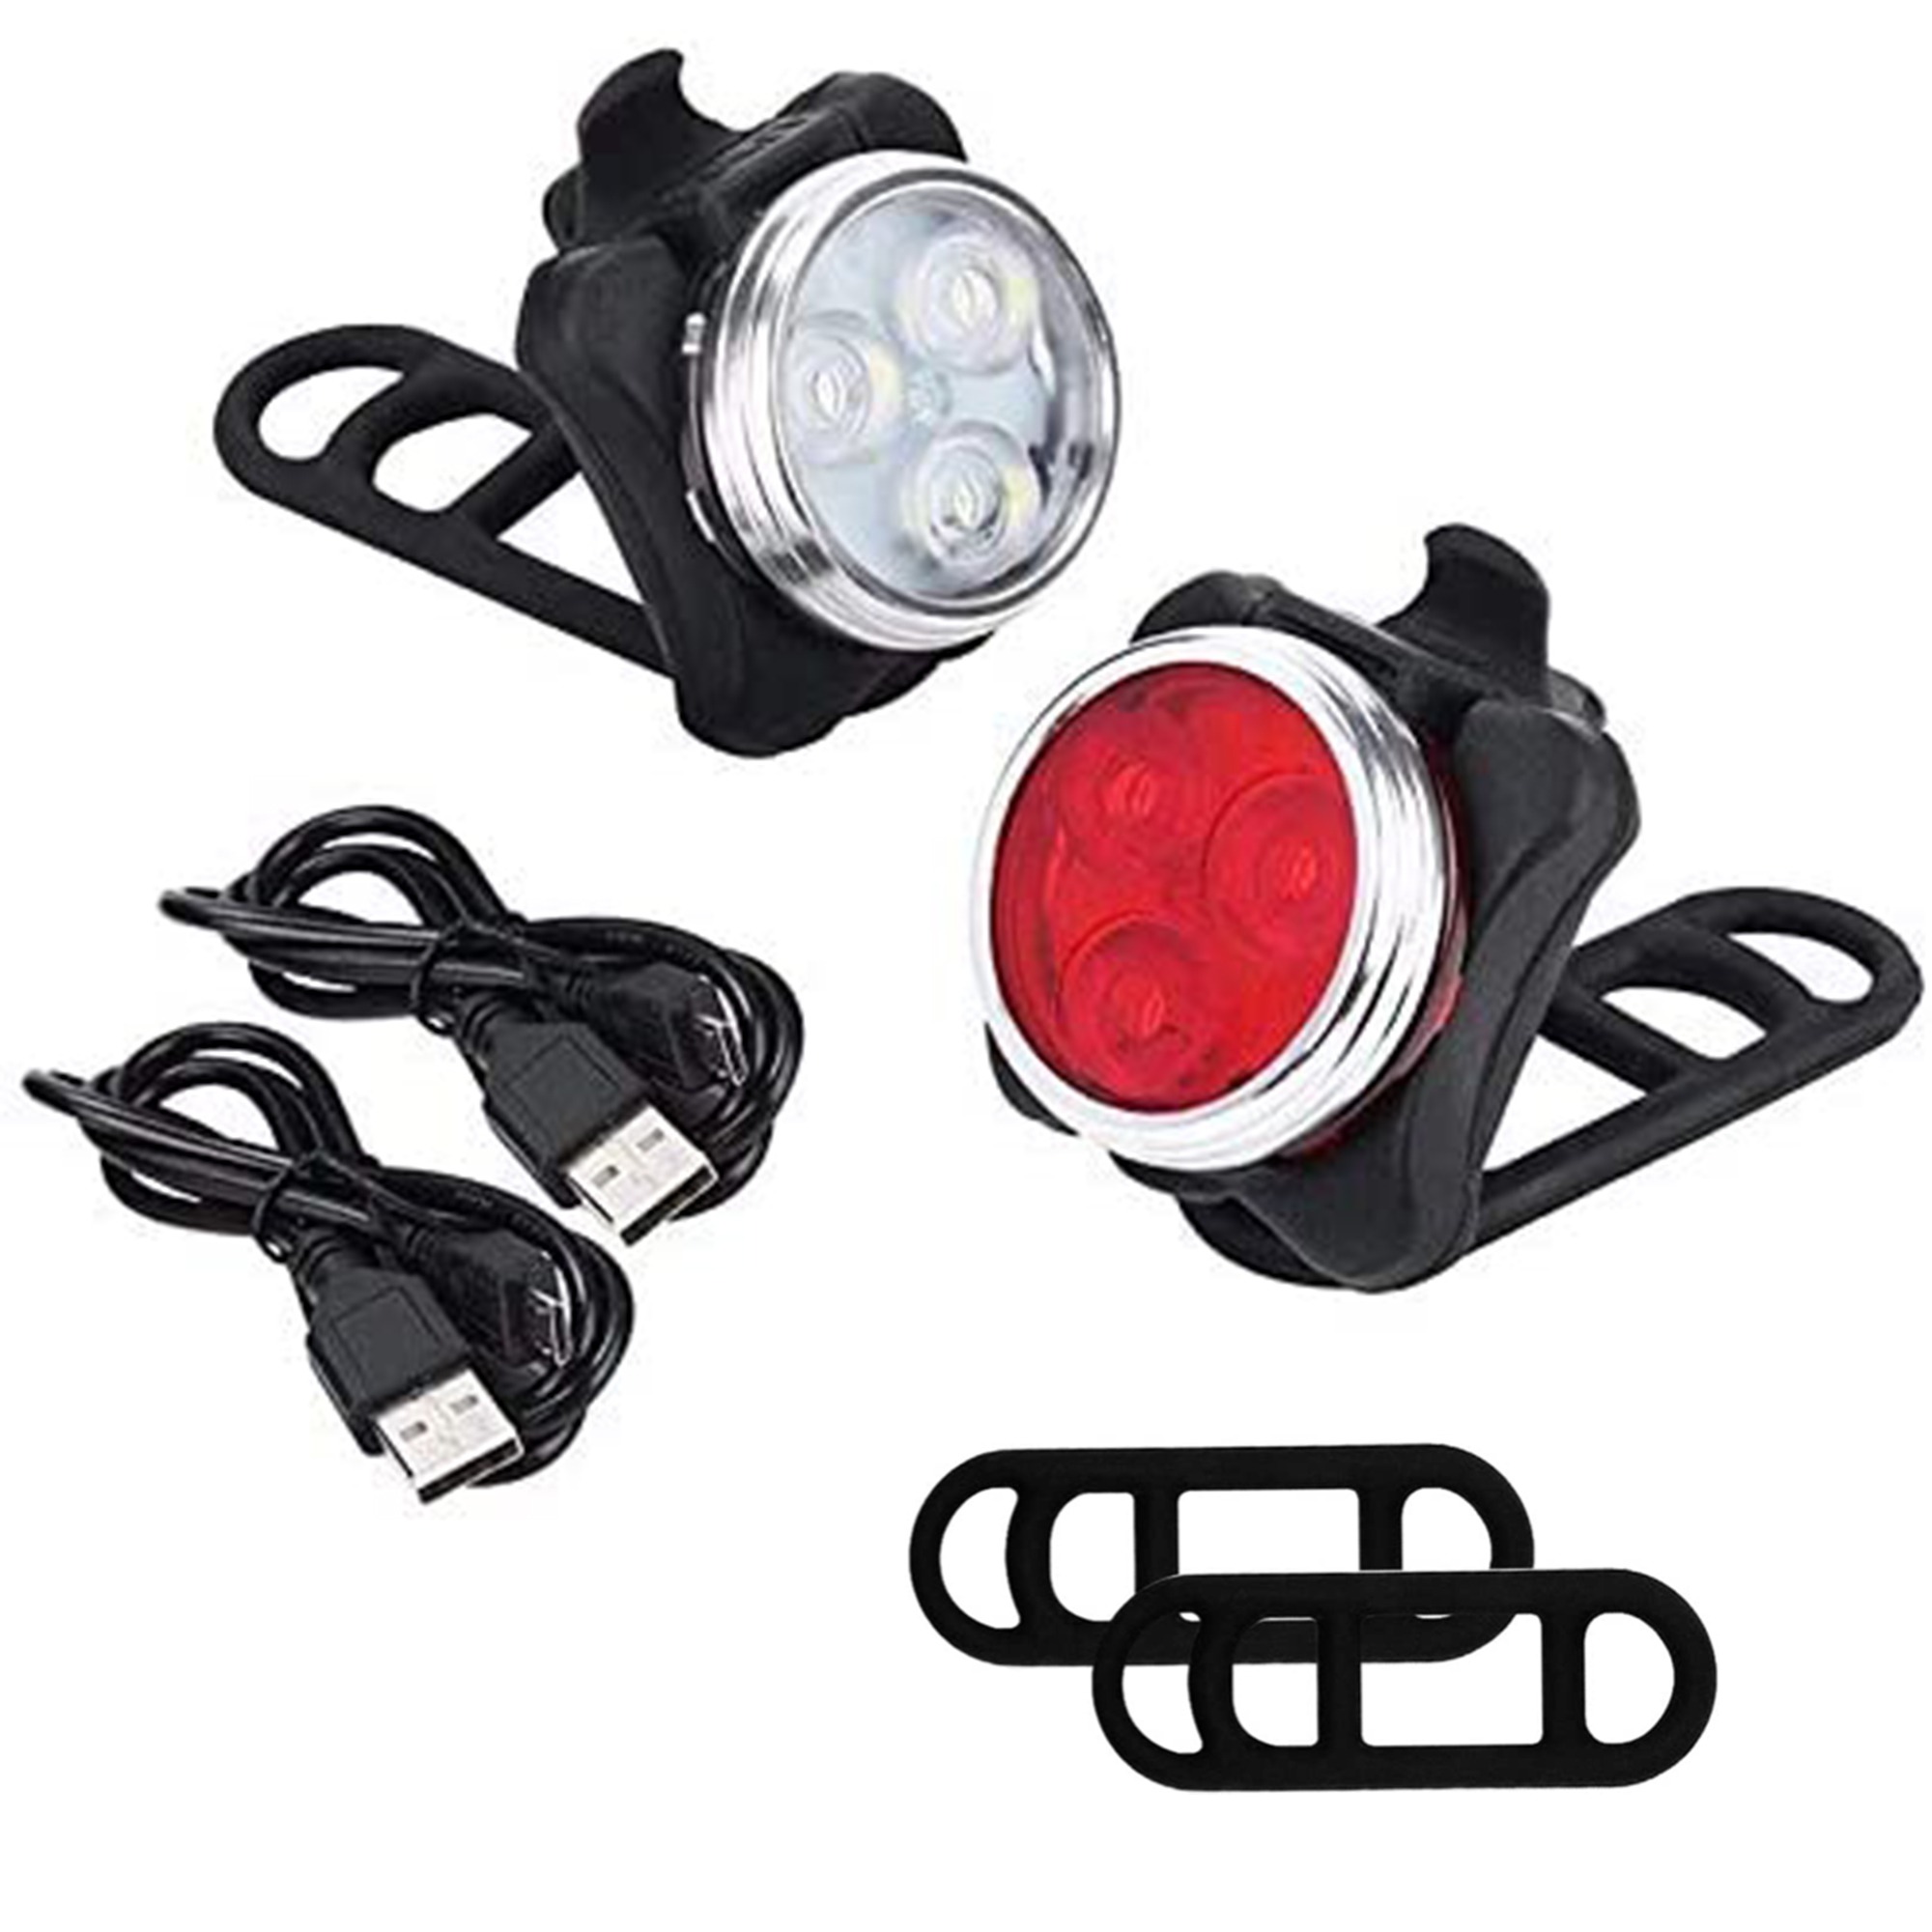 Easy to Install IPX6 Waterproof LED Bicycle Lights,Fits On Any Road Bikes Konesky Ultra Bright Bike Light Rechargeable Auto On/Off Smart Bike Tail Light 